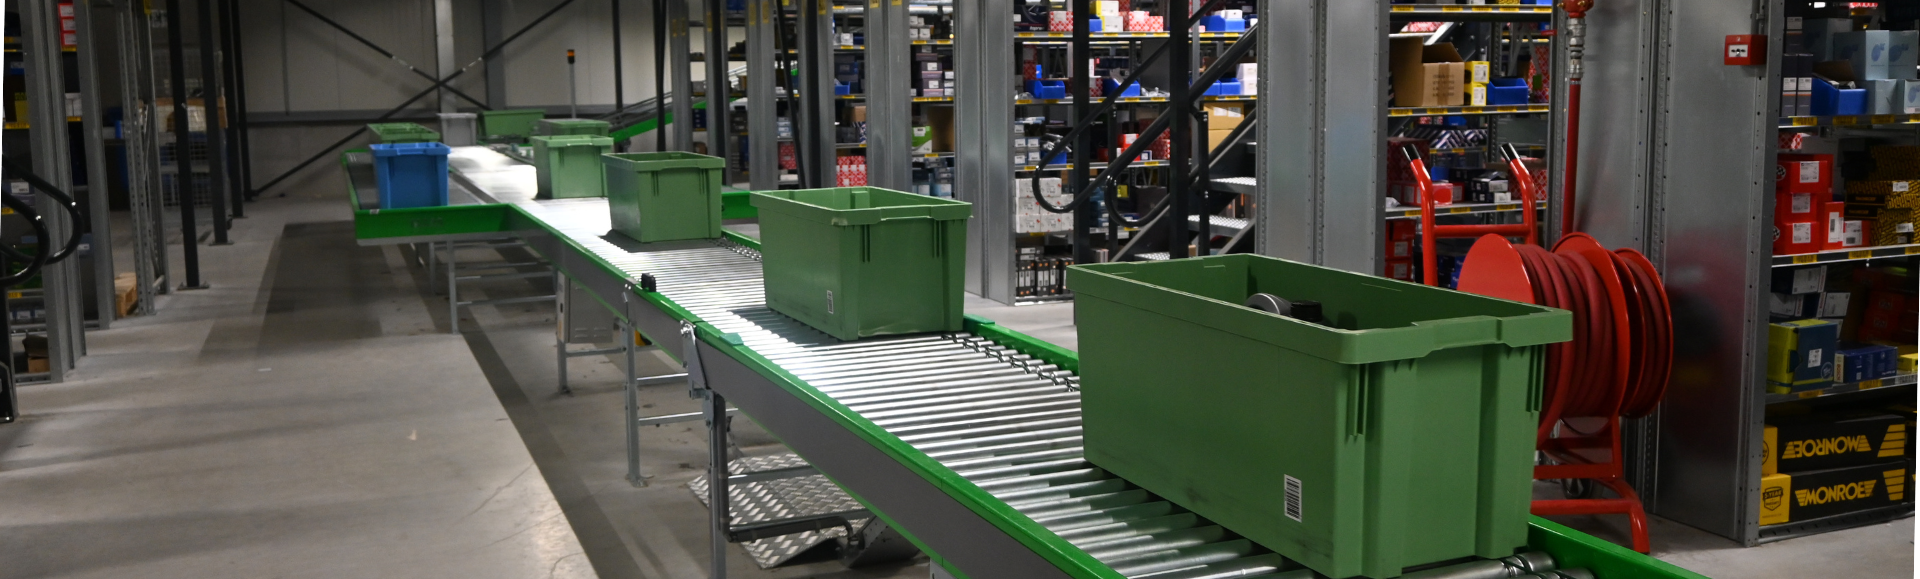 Molco car parts equipped with turn-stackable bins for new Warehouse